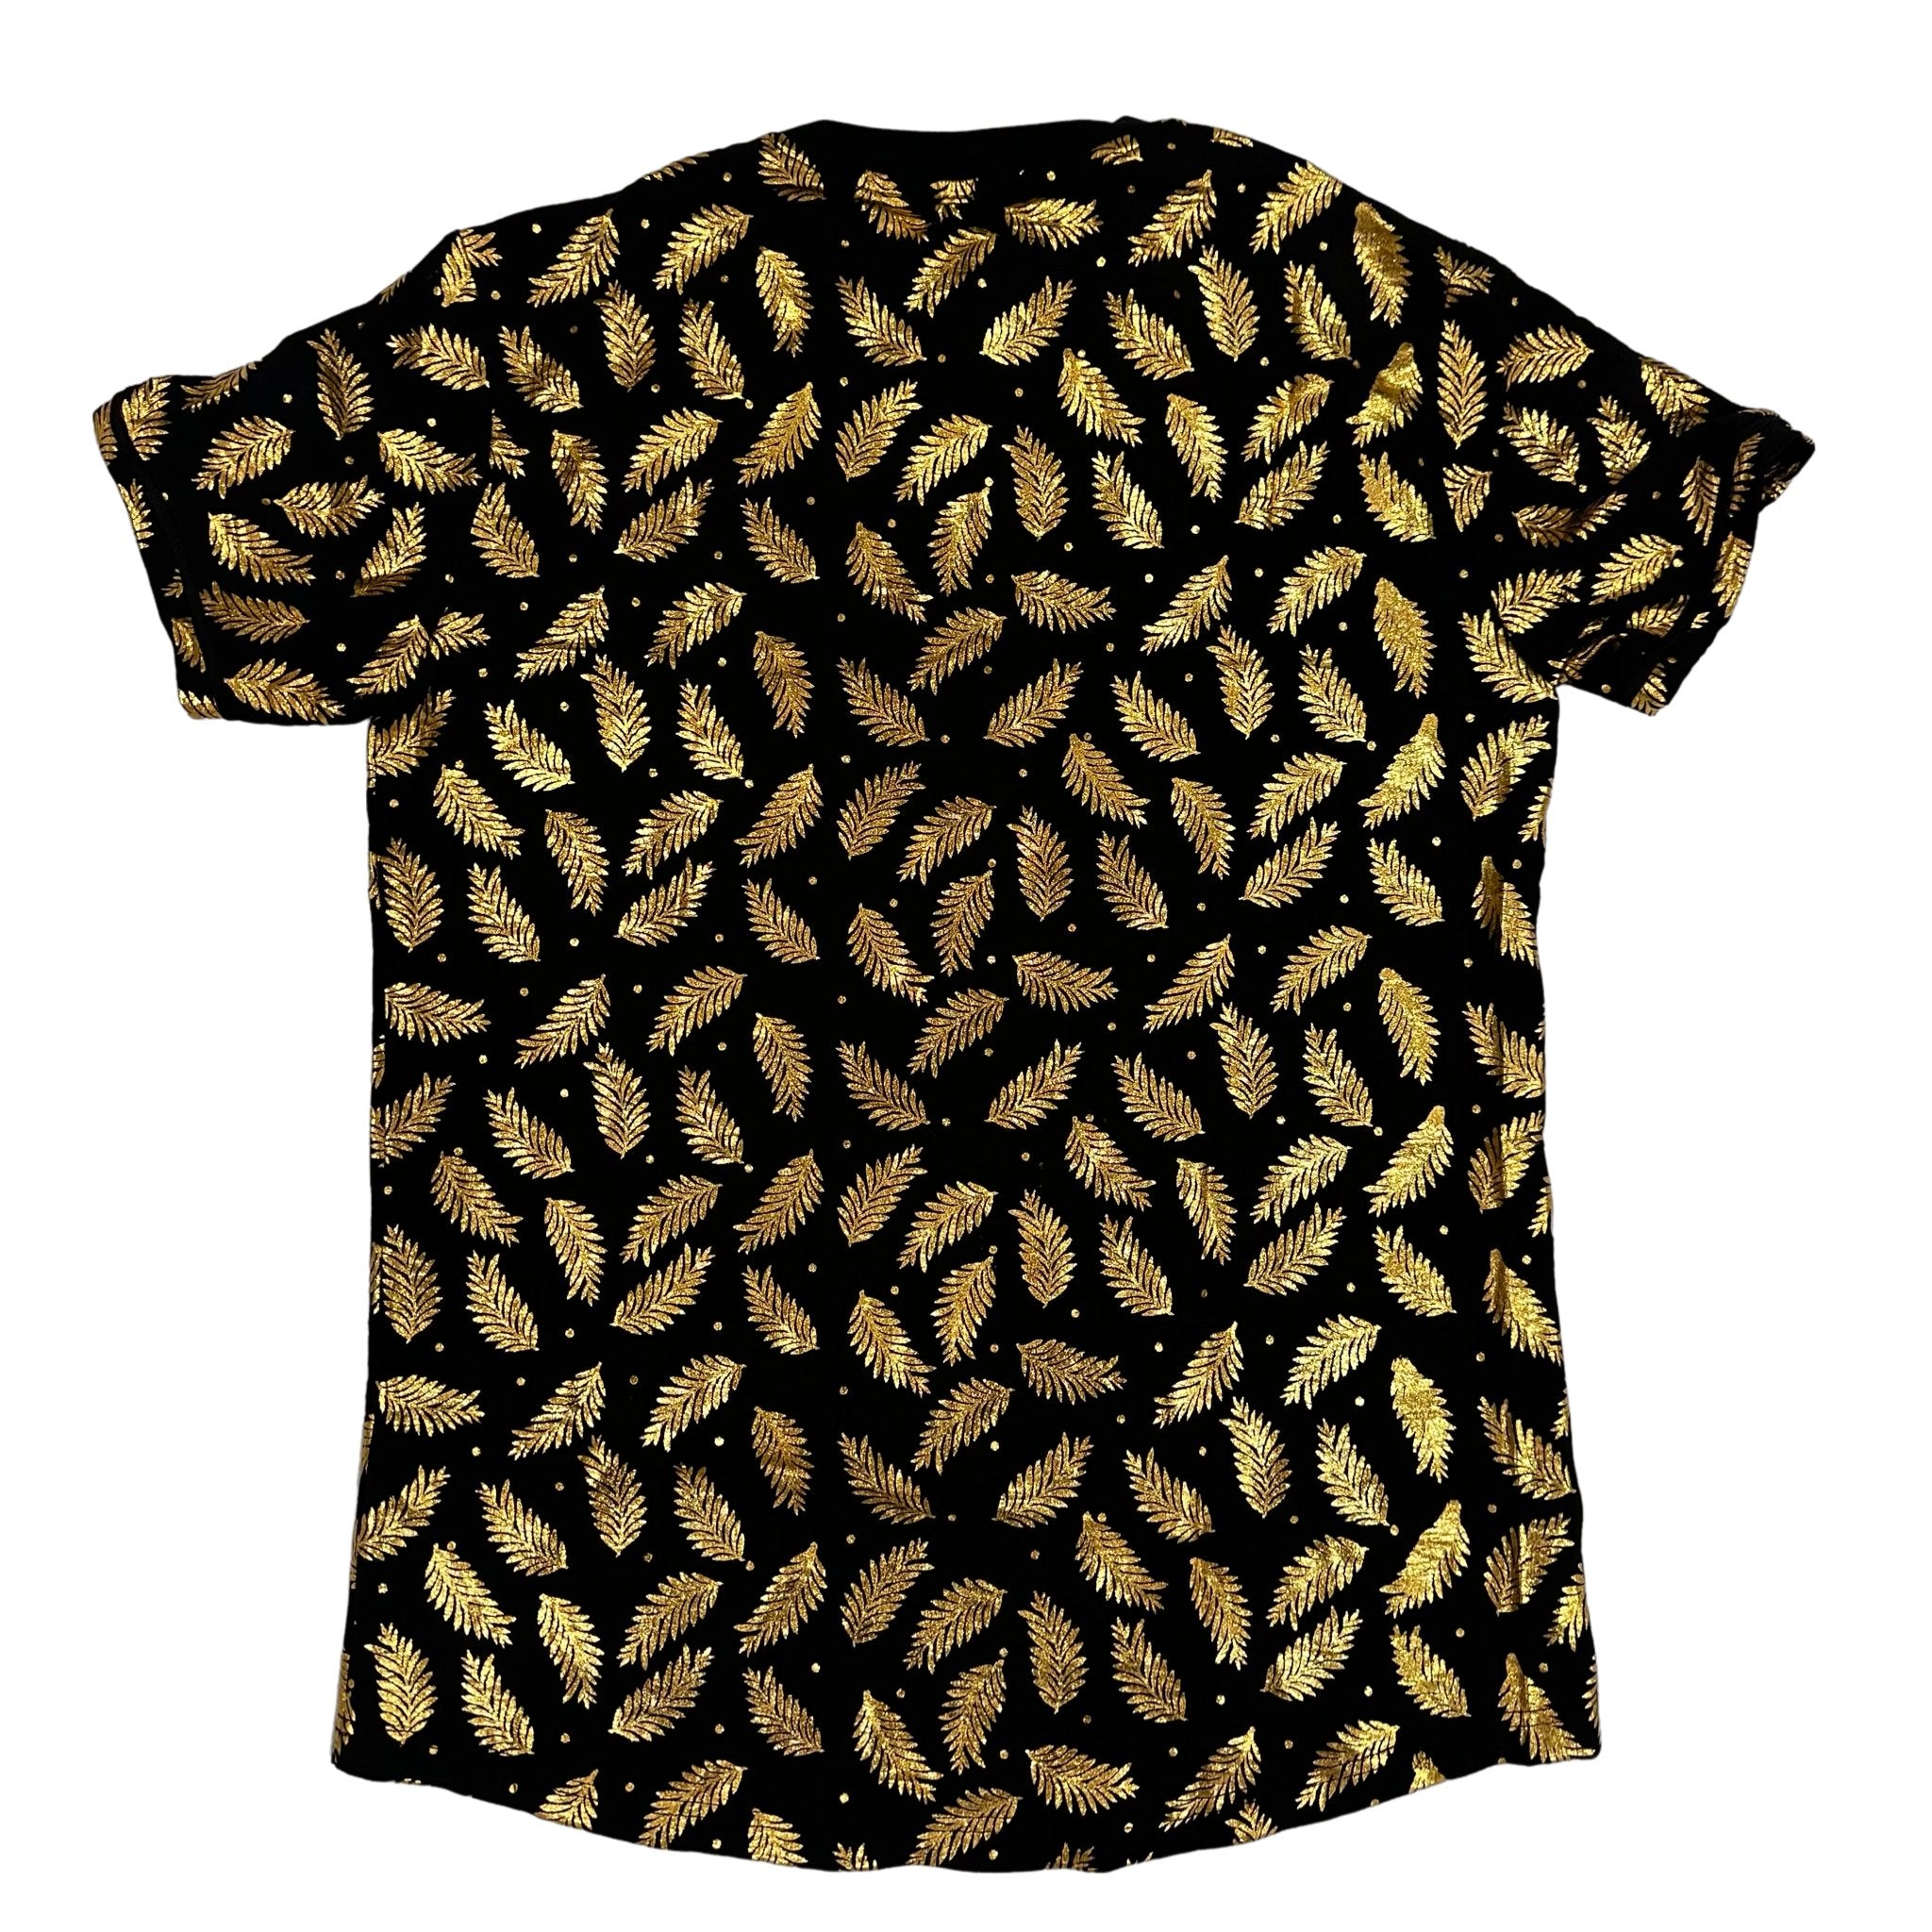 Golden Leaves Boy - Black Short Sleeves T-Shirt for Men (PRE-ORDER DISPATCH DATE 25 DECEMBER 2023) - Sarman Fashion - Wholesale Clothing Fashion Brand for Men from Canada